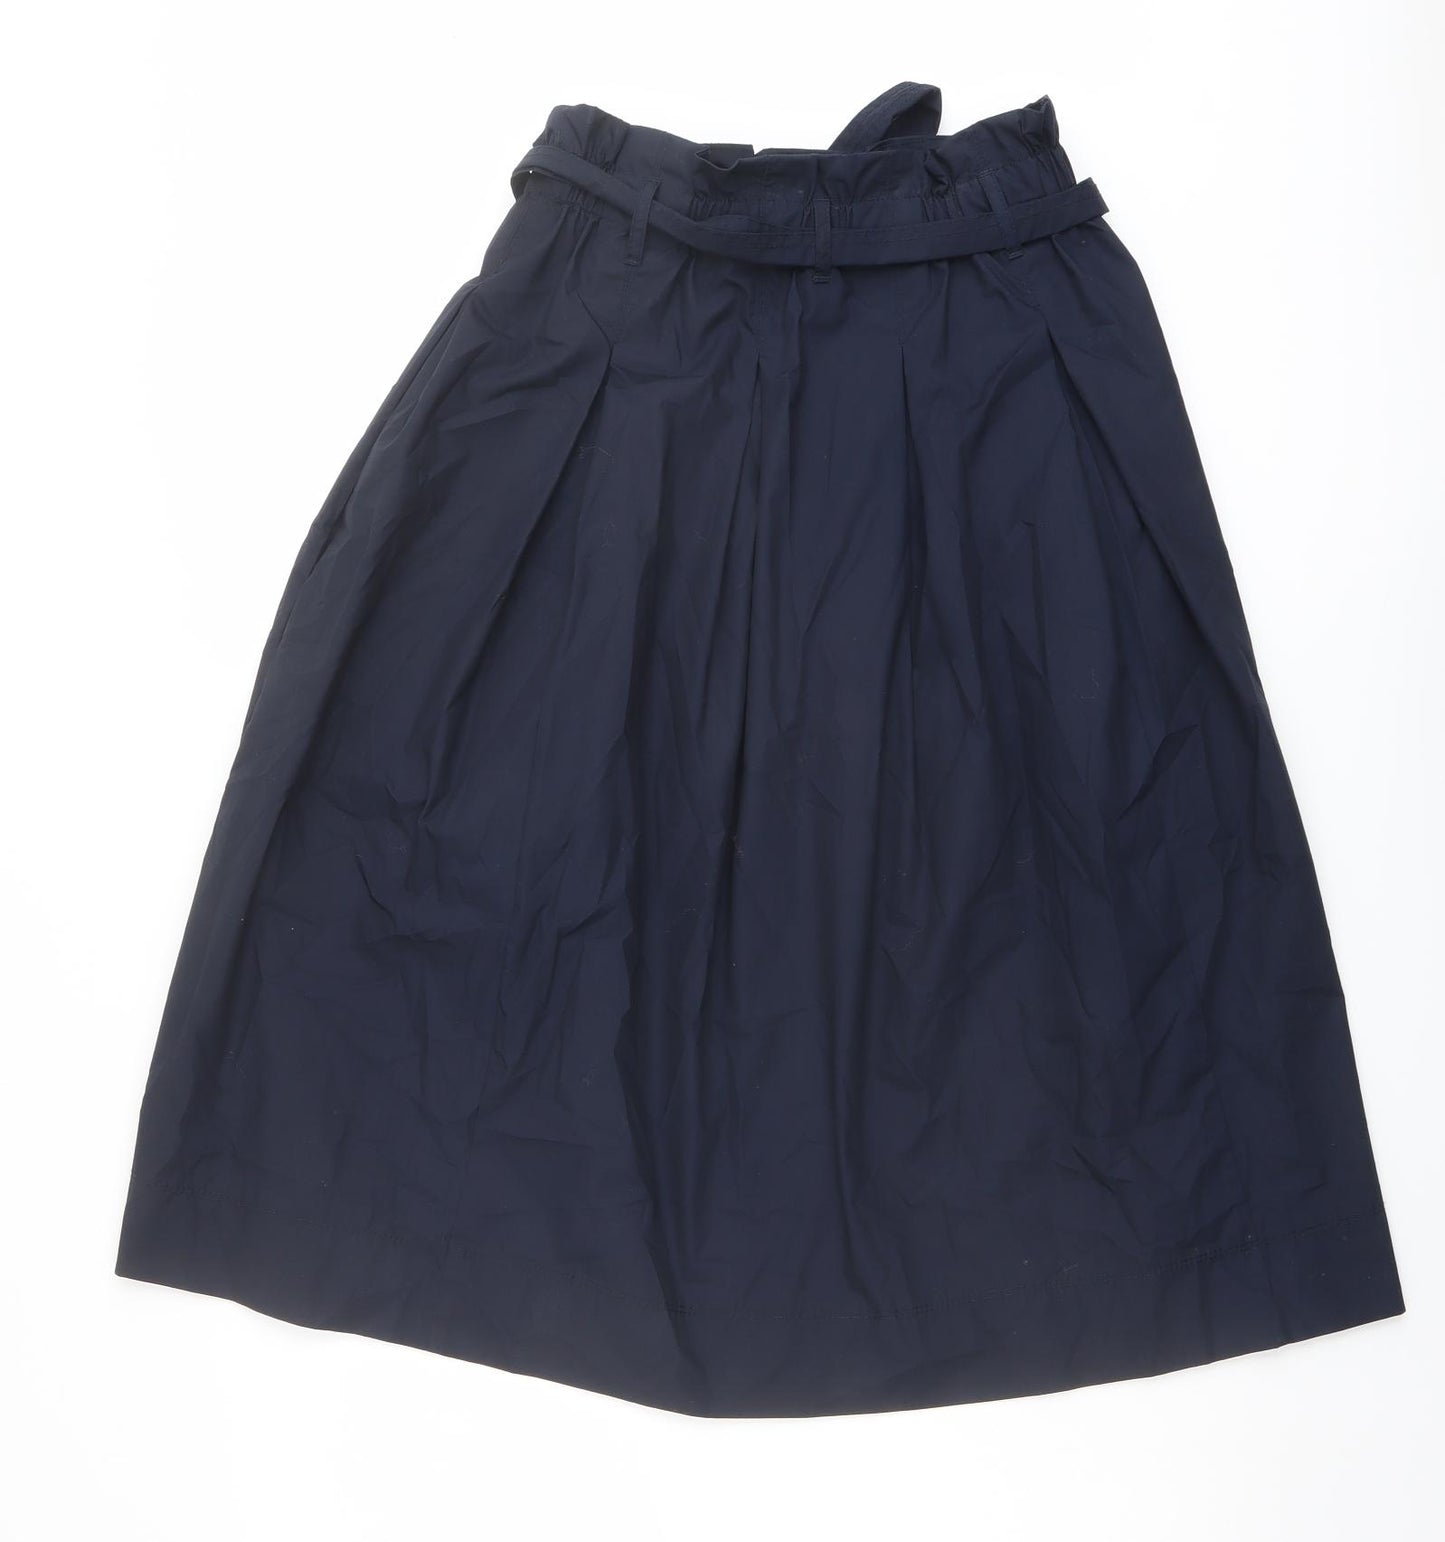 H&M Womens Blue Polyester Tulip Skirt Size 8 - Belt included